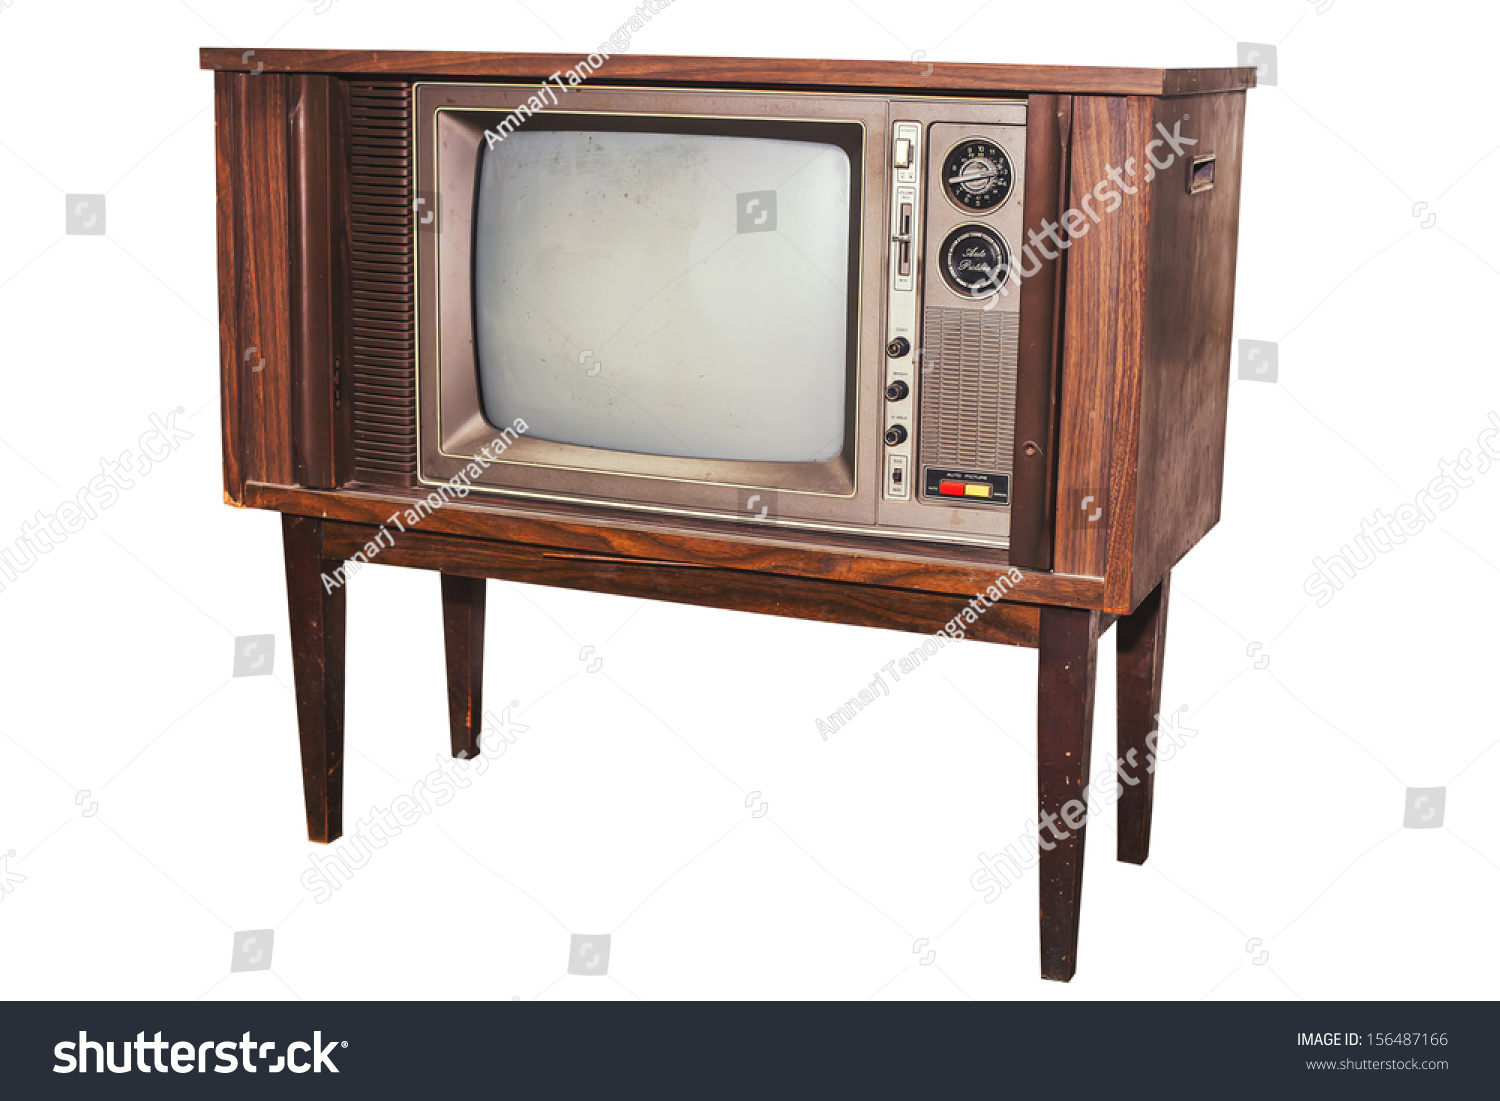 Old and antique analog television on isolate #156487166